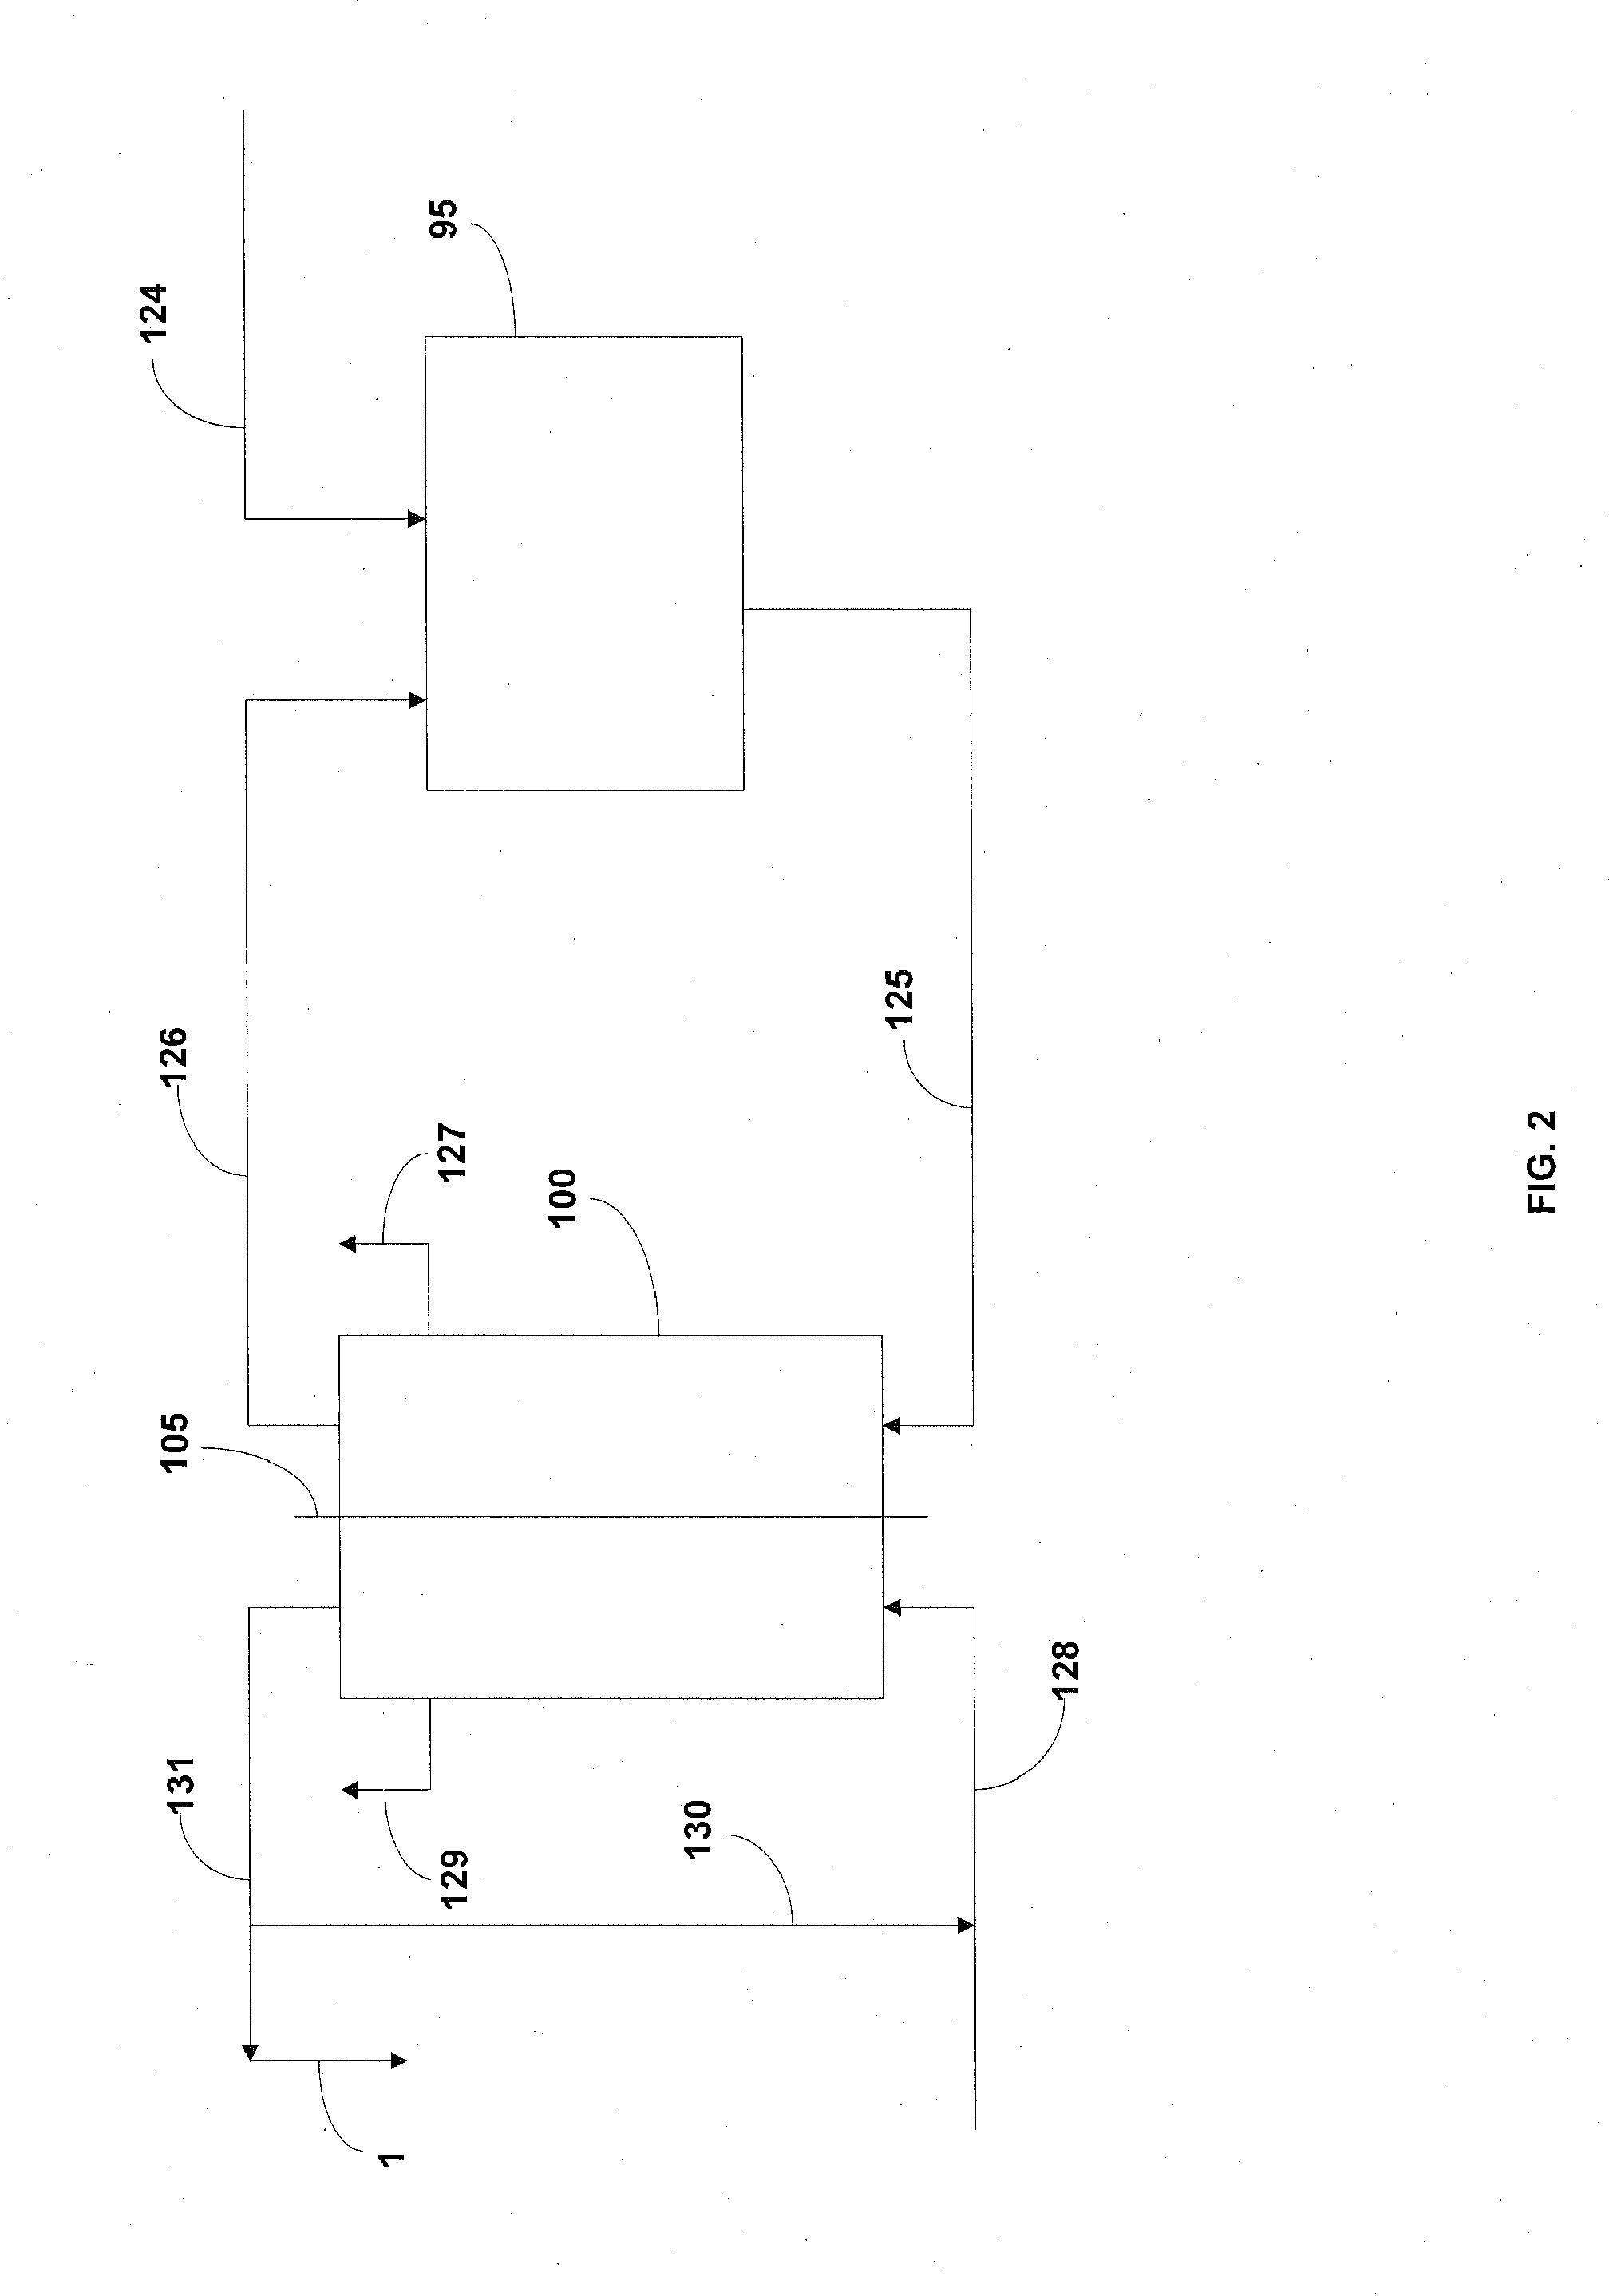 Processes for preparing highly pure lithium carbonate and other highly pure lithium containing compounds